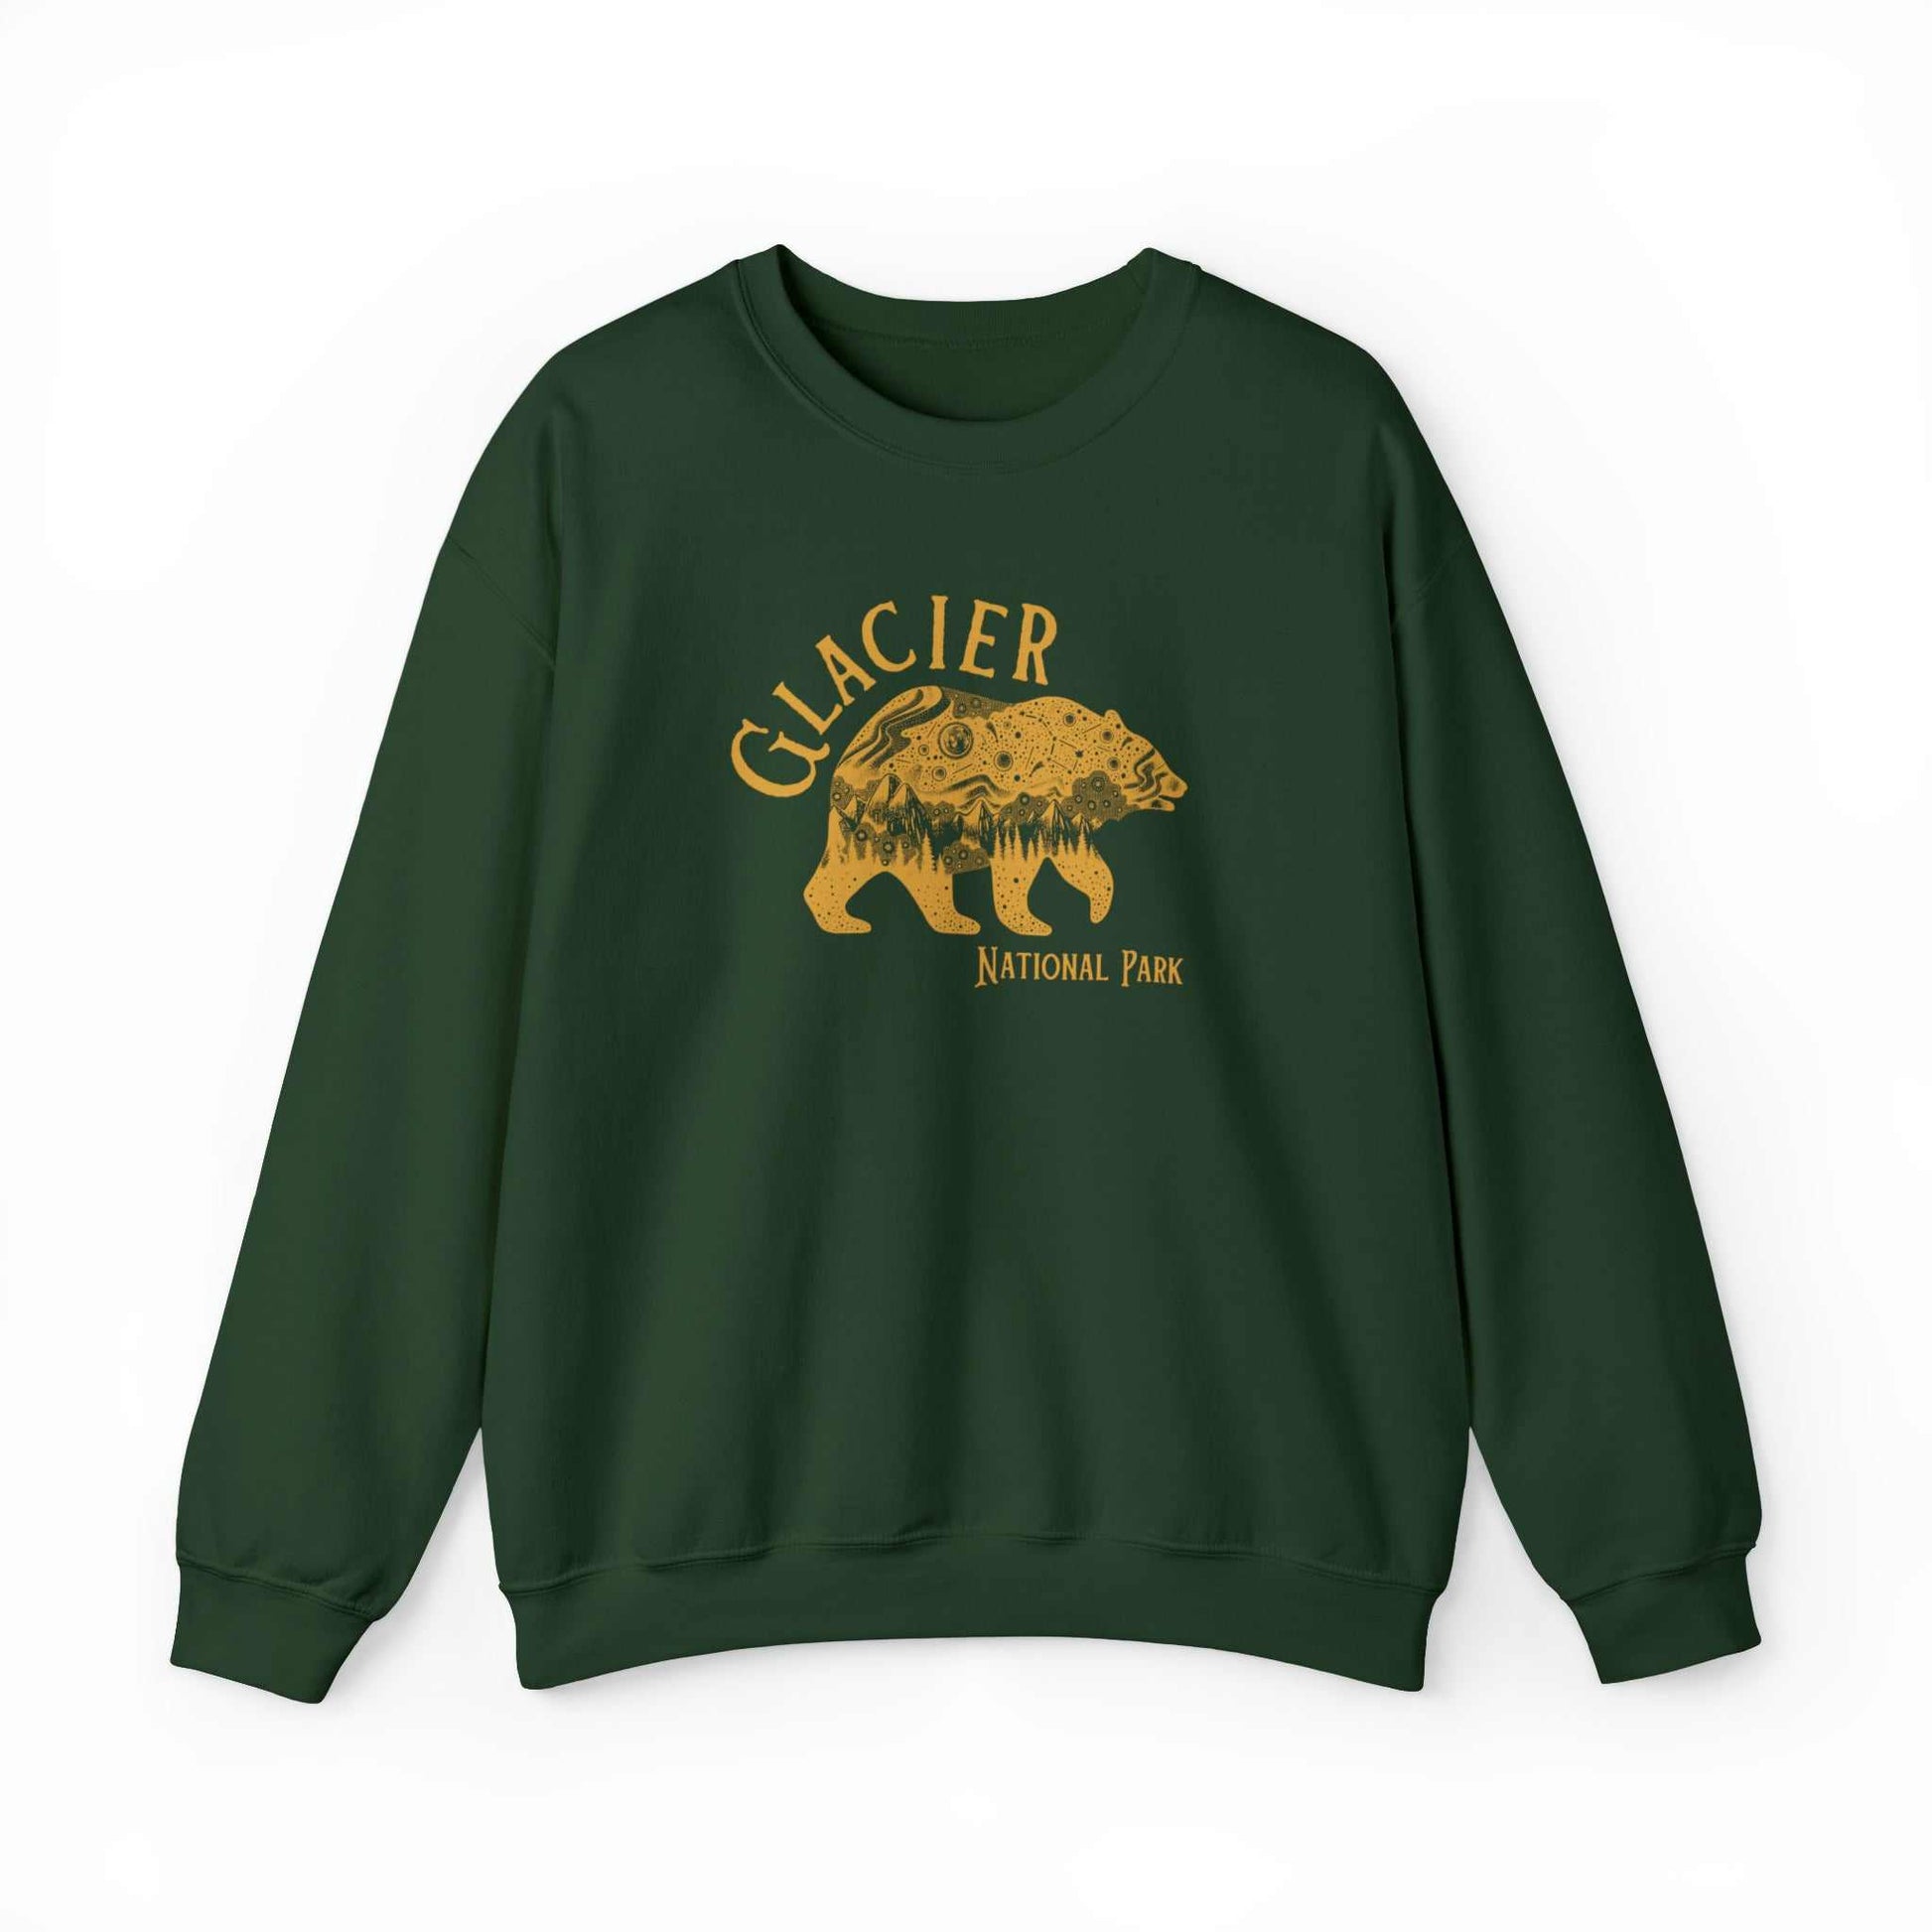 Glacier National Park Galaxy Bear SweatshirtBring the magic and beauty of Glacier National Park at night into your sweater rotation with this crewneck galaxy grizzly bear sweatshirt inspired by the midnight ma